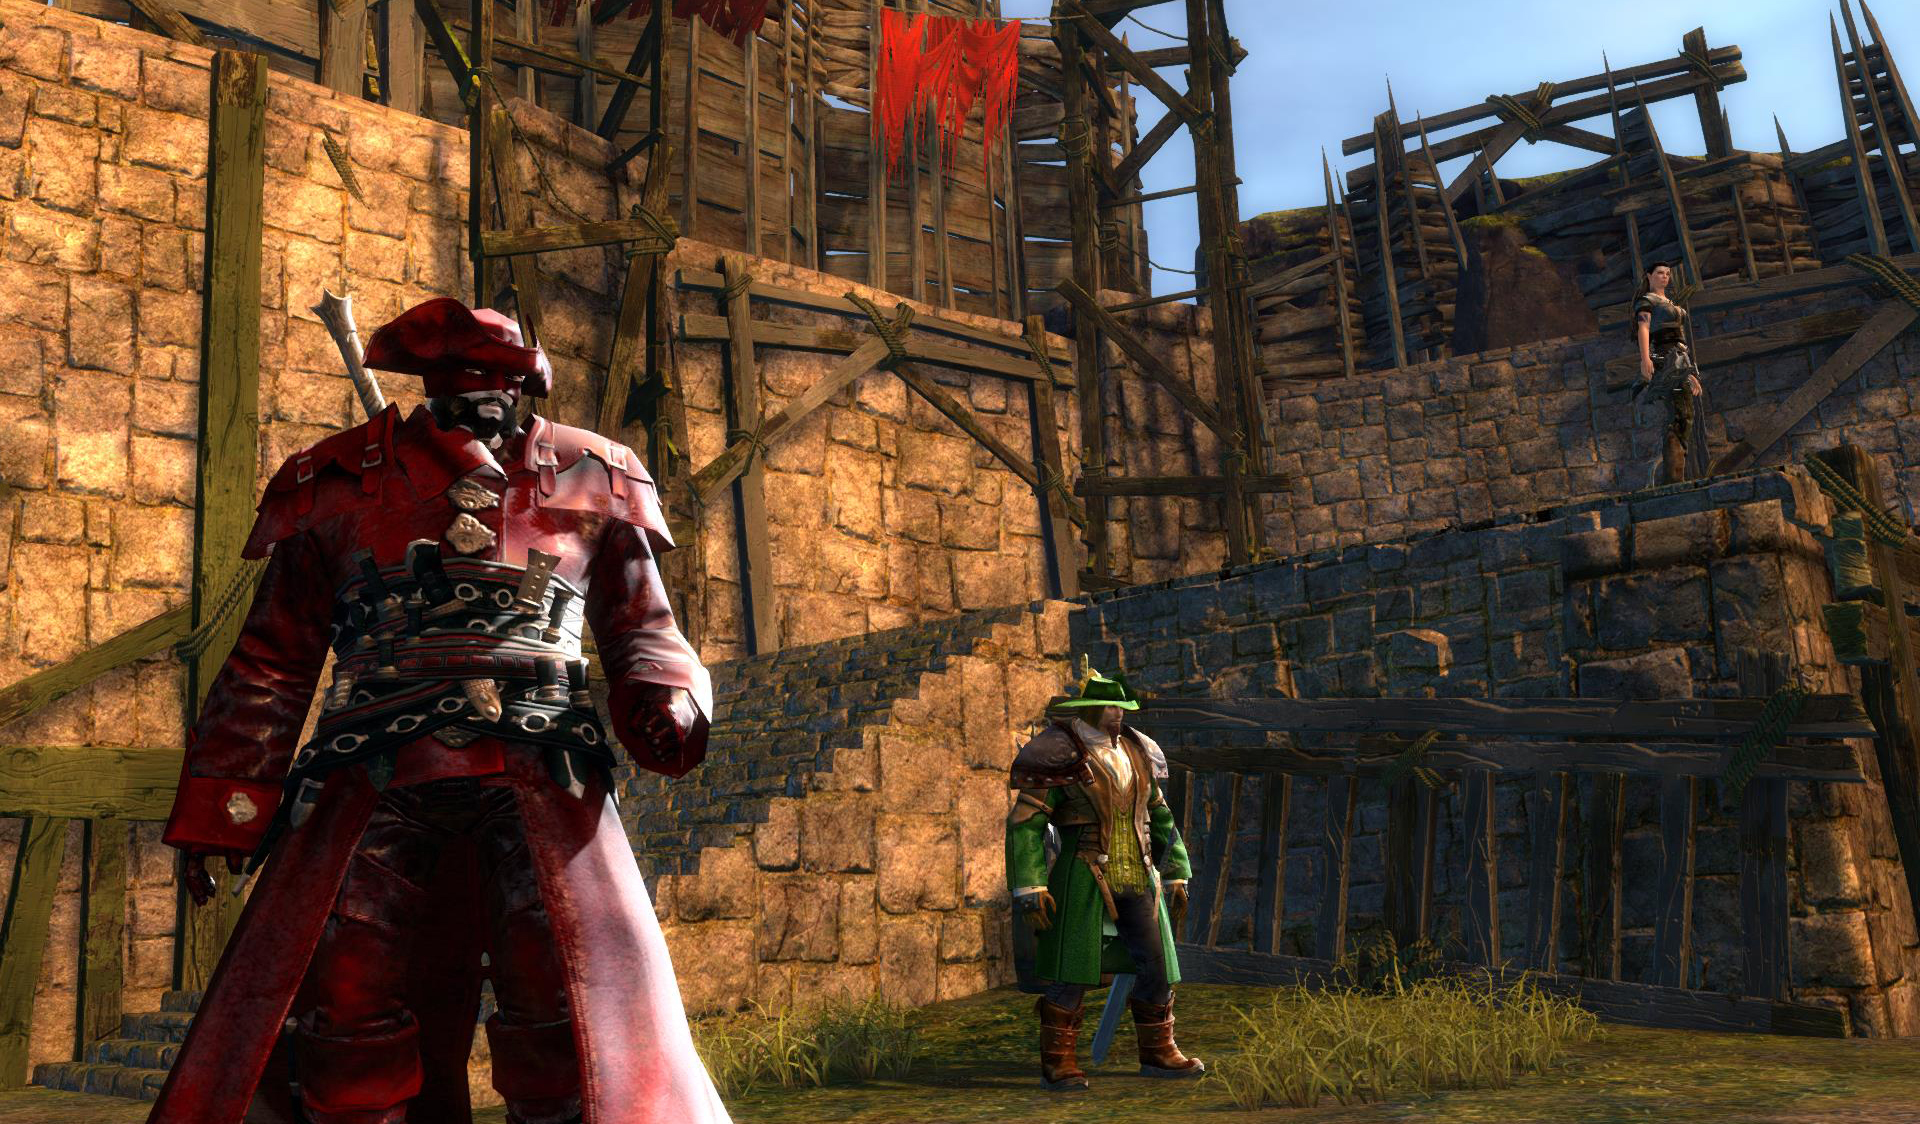 gw2hot_04-2015_red_lord